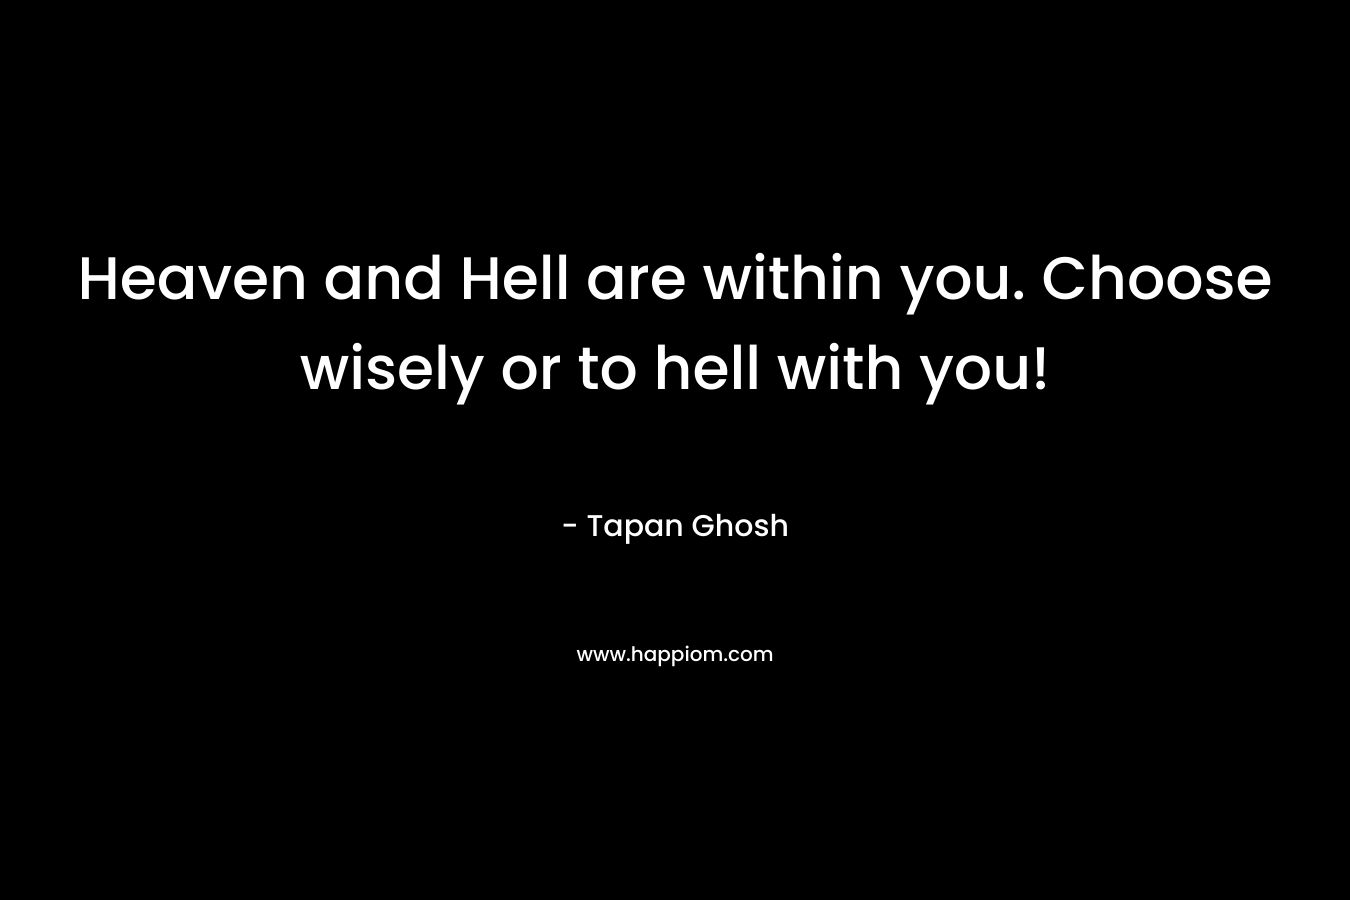 Heaven and Hell are within you. Choose wisely or to hell with you! – Tapan Ghosh